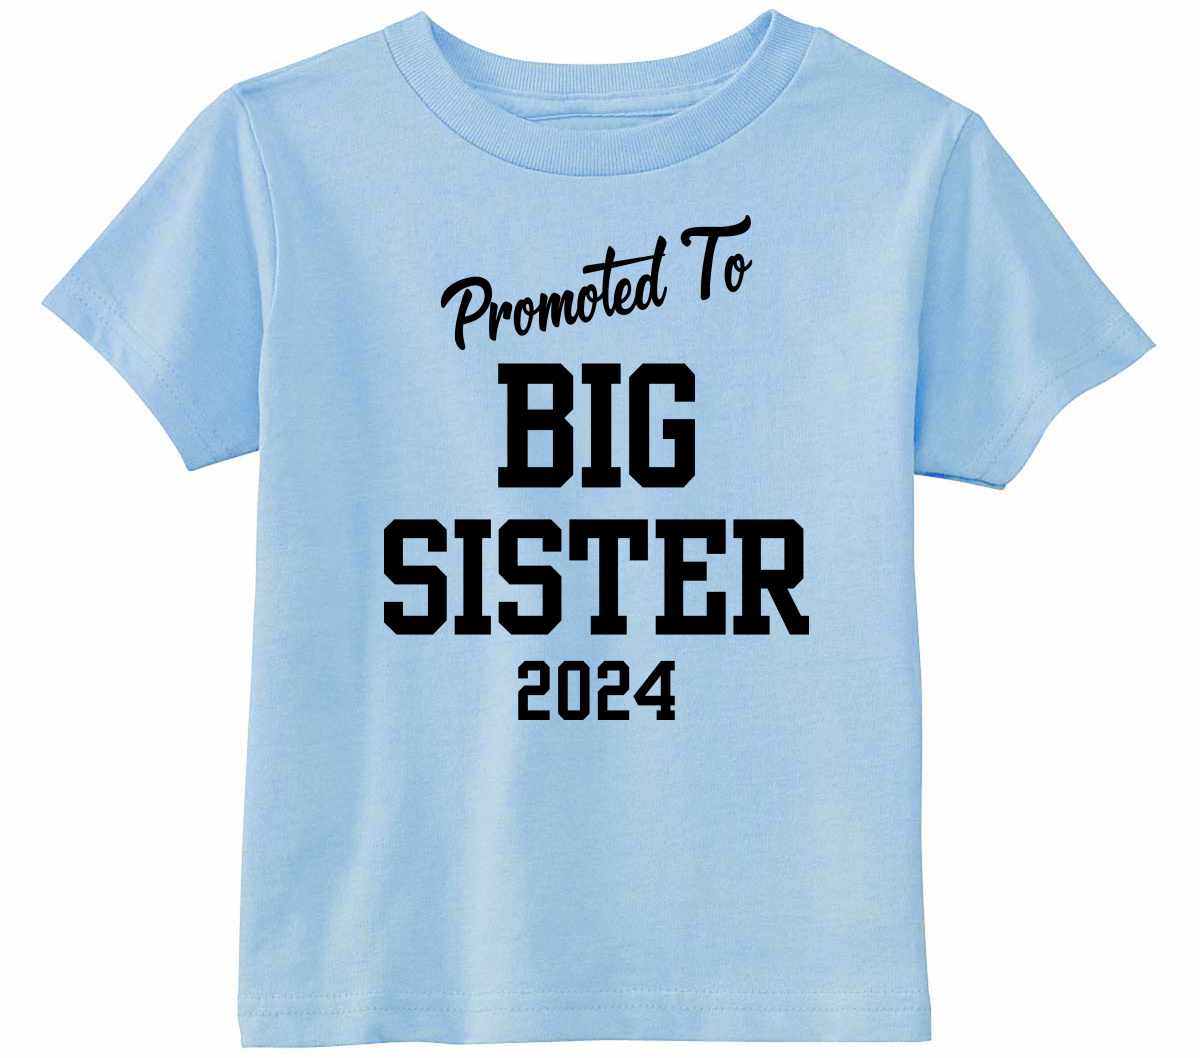 Promoted to Big Sister 2024 on Infant-Toddler T-Shirt